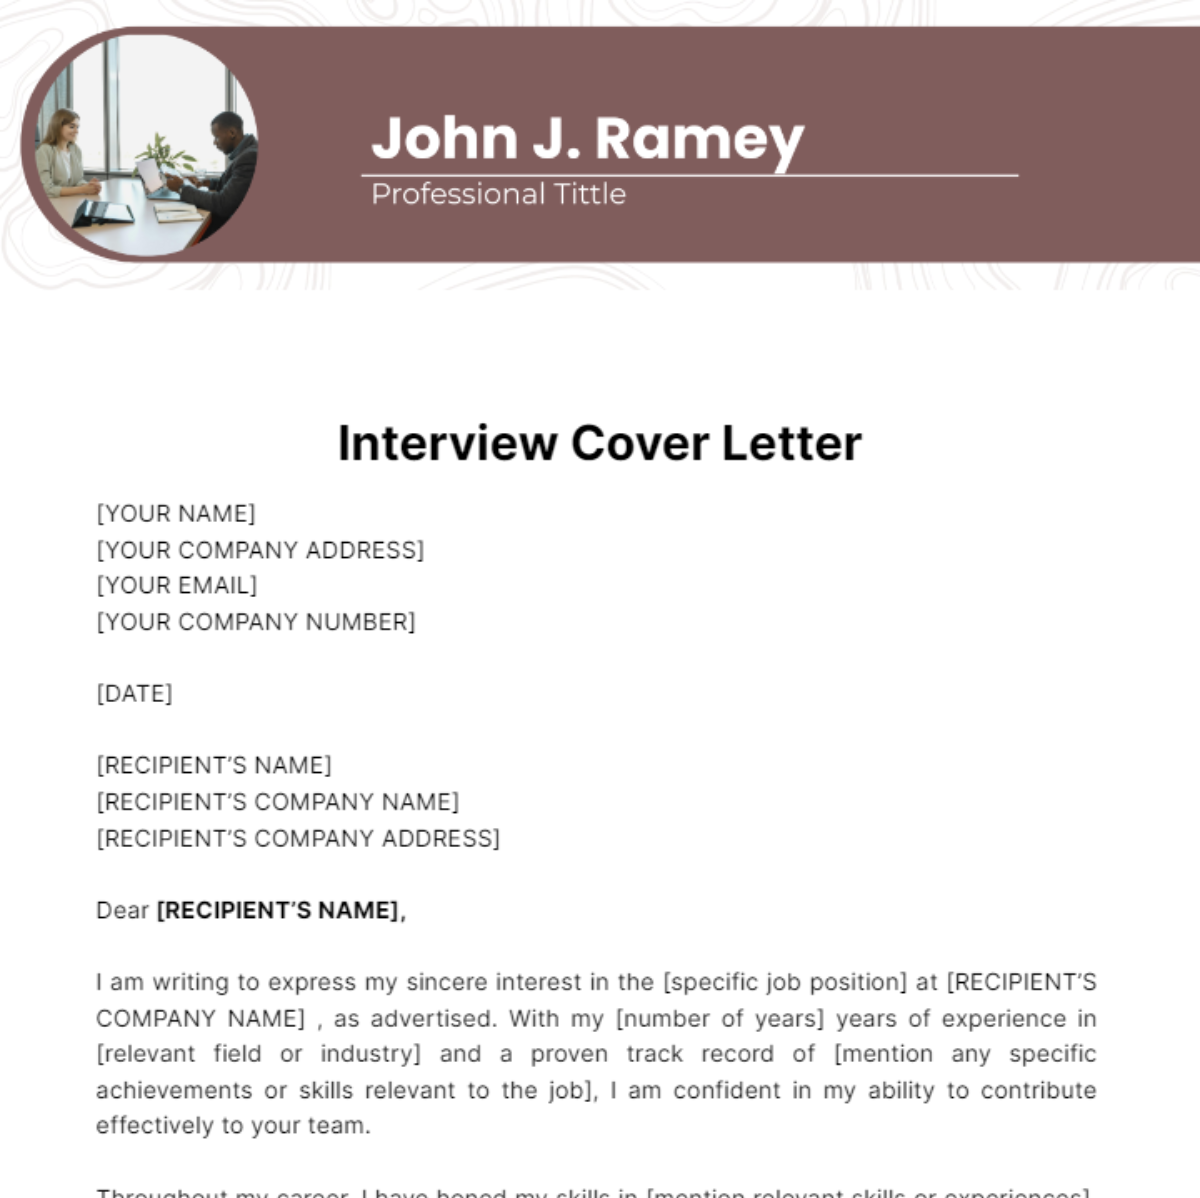 Interview Cover Letter Template